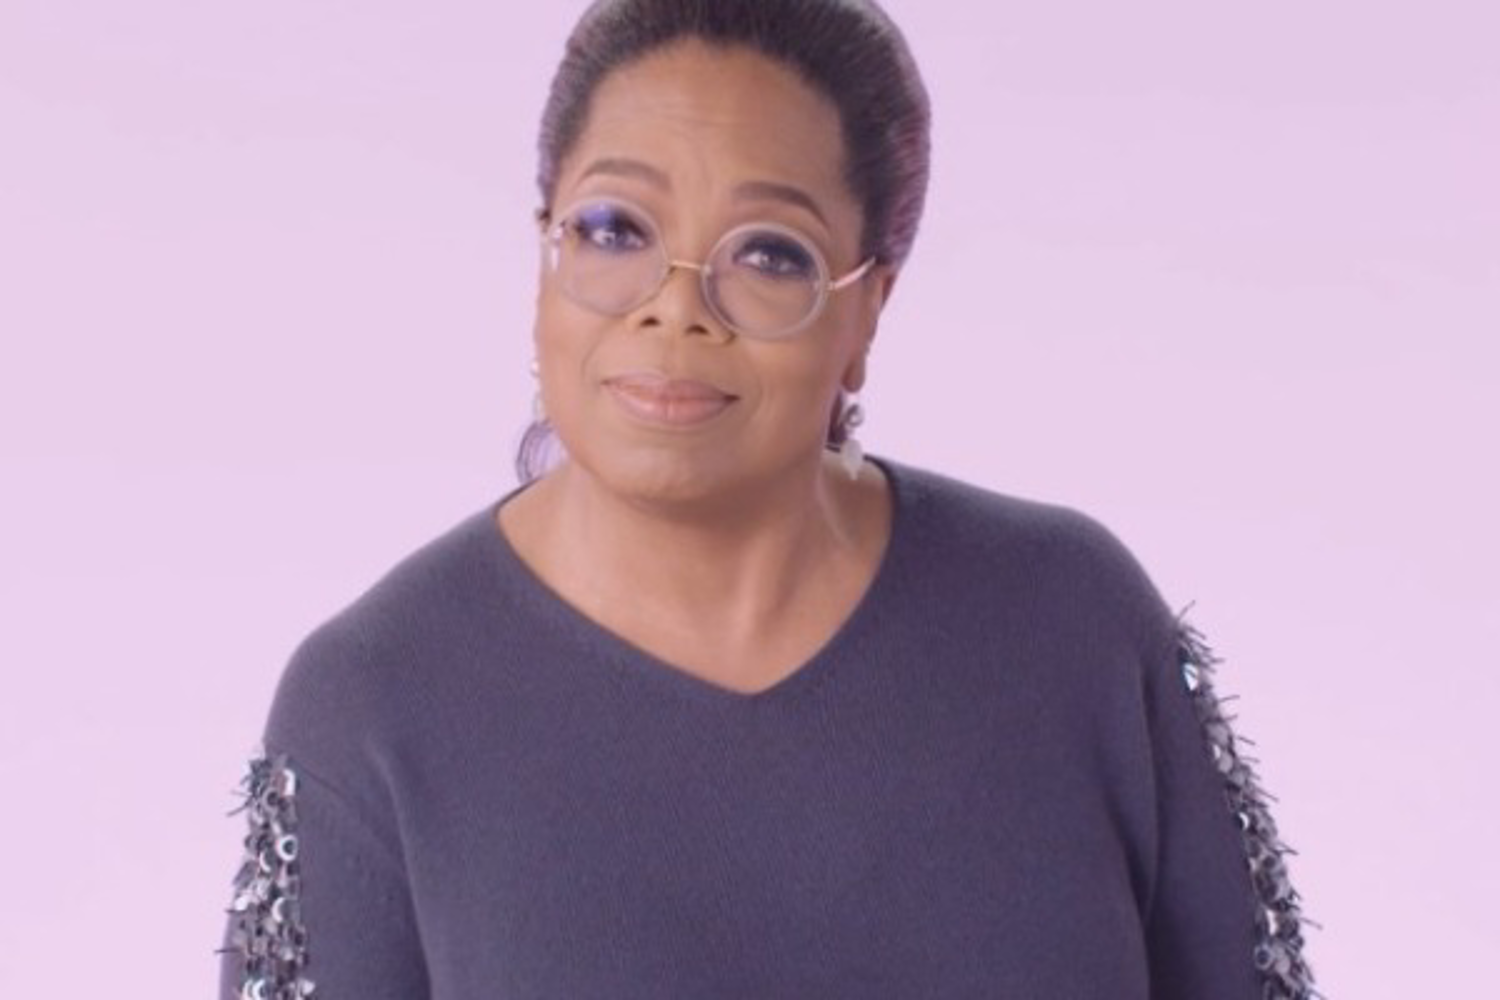 Oprah Porn - Oprah Winfrey Says the False Story About Being Involved In a Child  Pornography Ring Brought Up Bad Childhood Memories